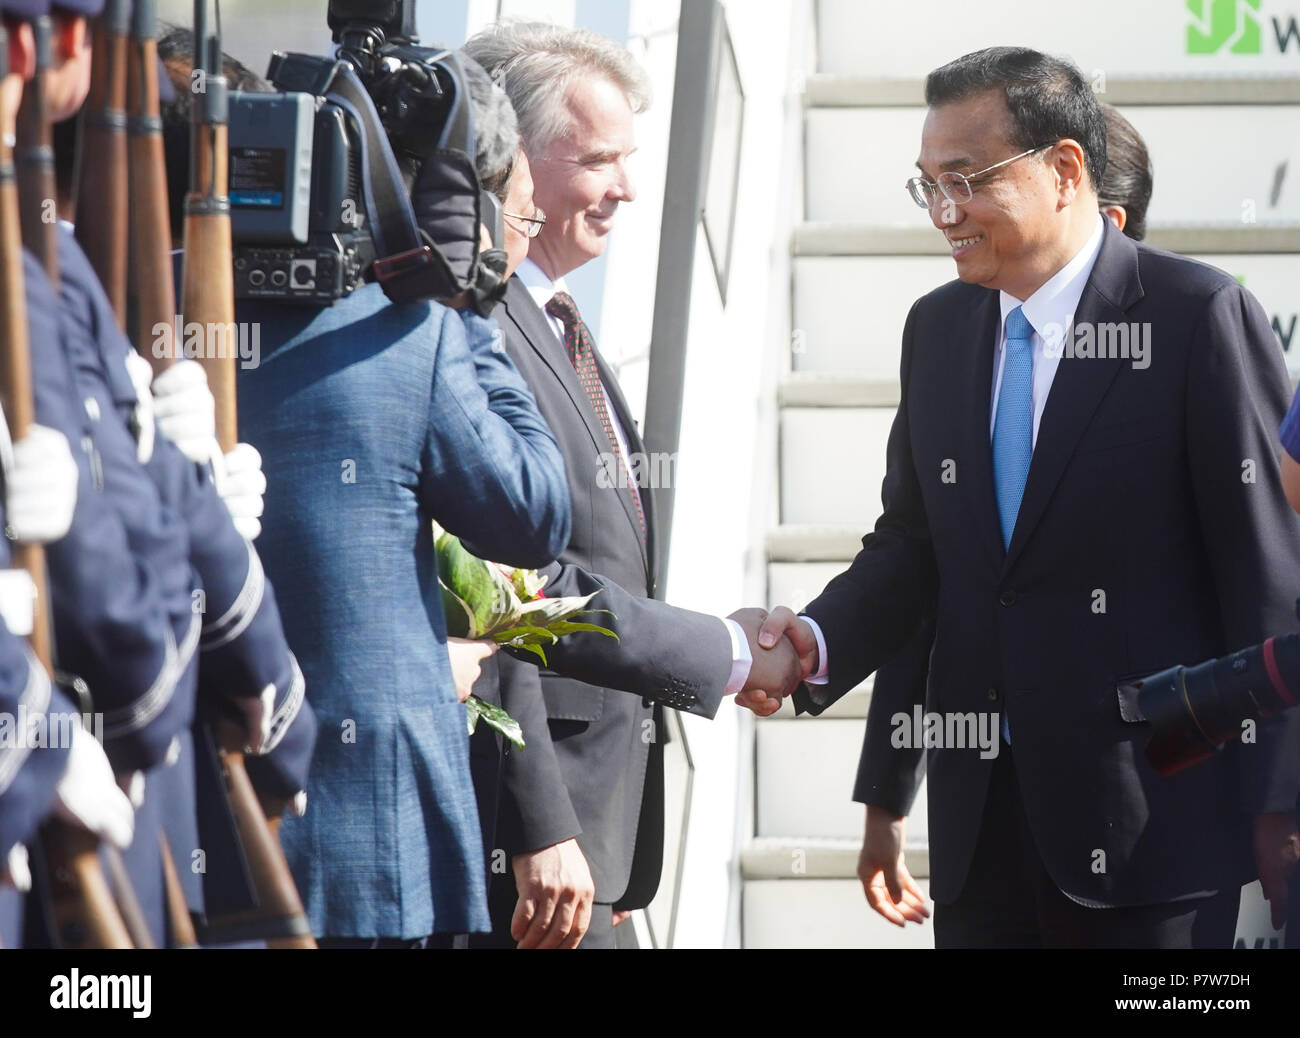 Berlin, Germany. 08th July, 2018. Li Keqiang (R), Premier of the People's Republic of China, is greeted after arriving at the military section of Tegel Airport. The premier is in Berlin for the 5th China-Germany Inter-governmental Consultation. Credit: Jörg Carstensen/dpa/Alamy Live News Stock Photo